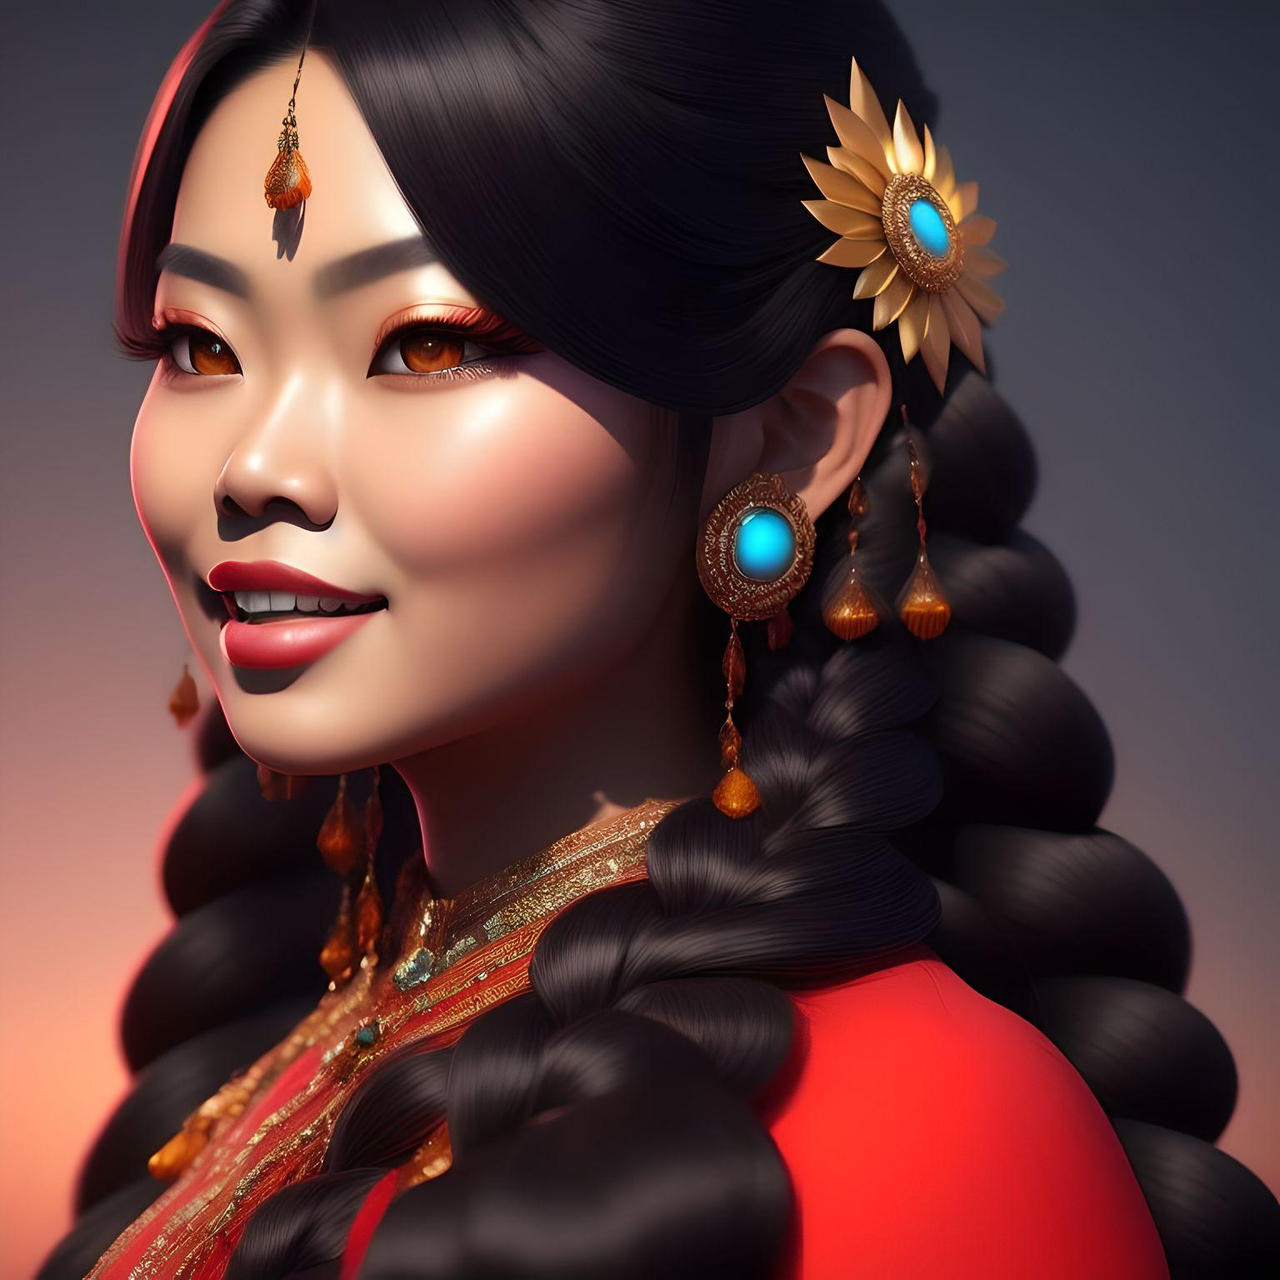 asian girl in briads by Longhair6942 on DeviantArt